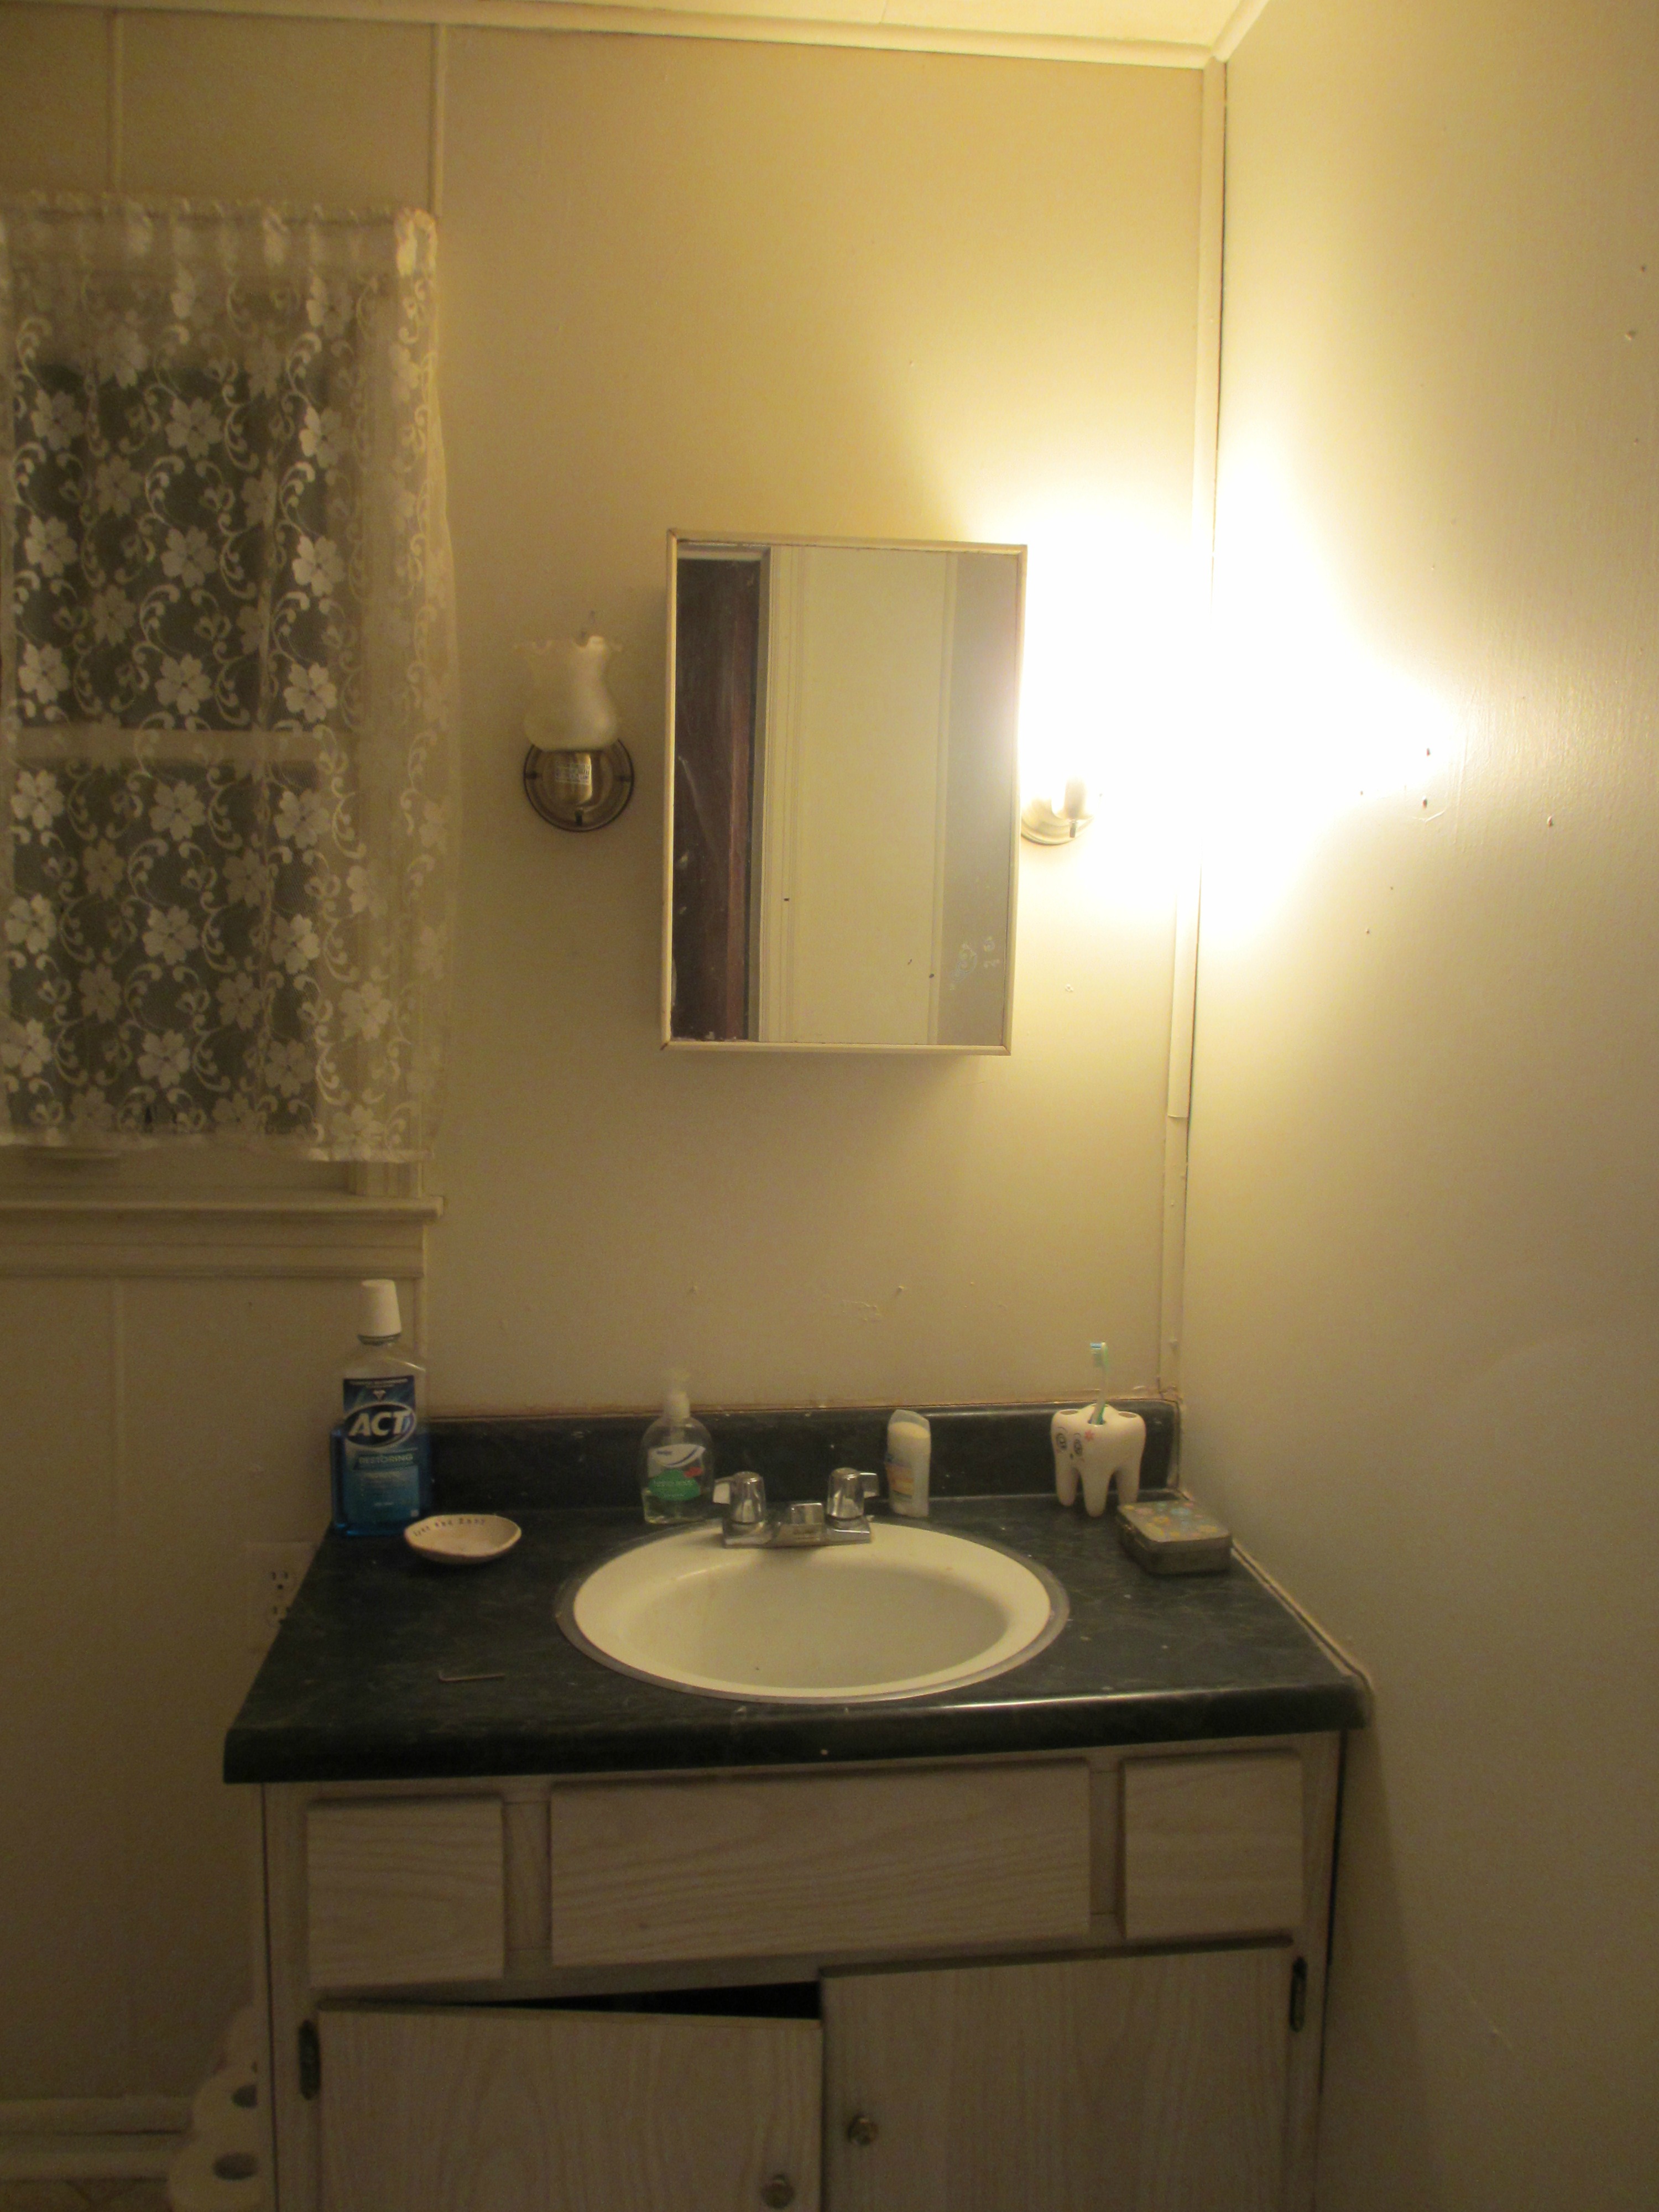 Bathroom Mirrors With Lights Homebase Bathroom Mirrors And Wall